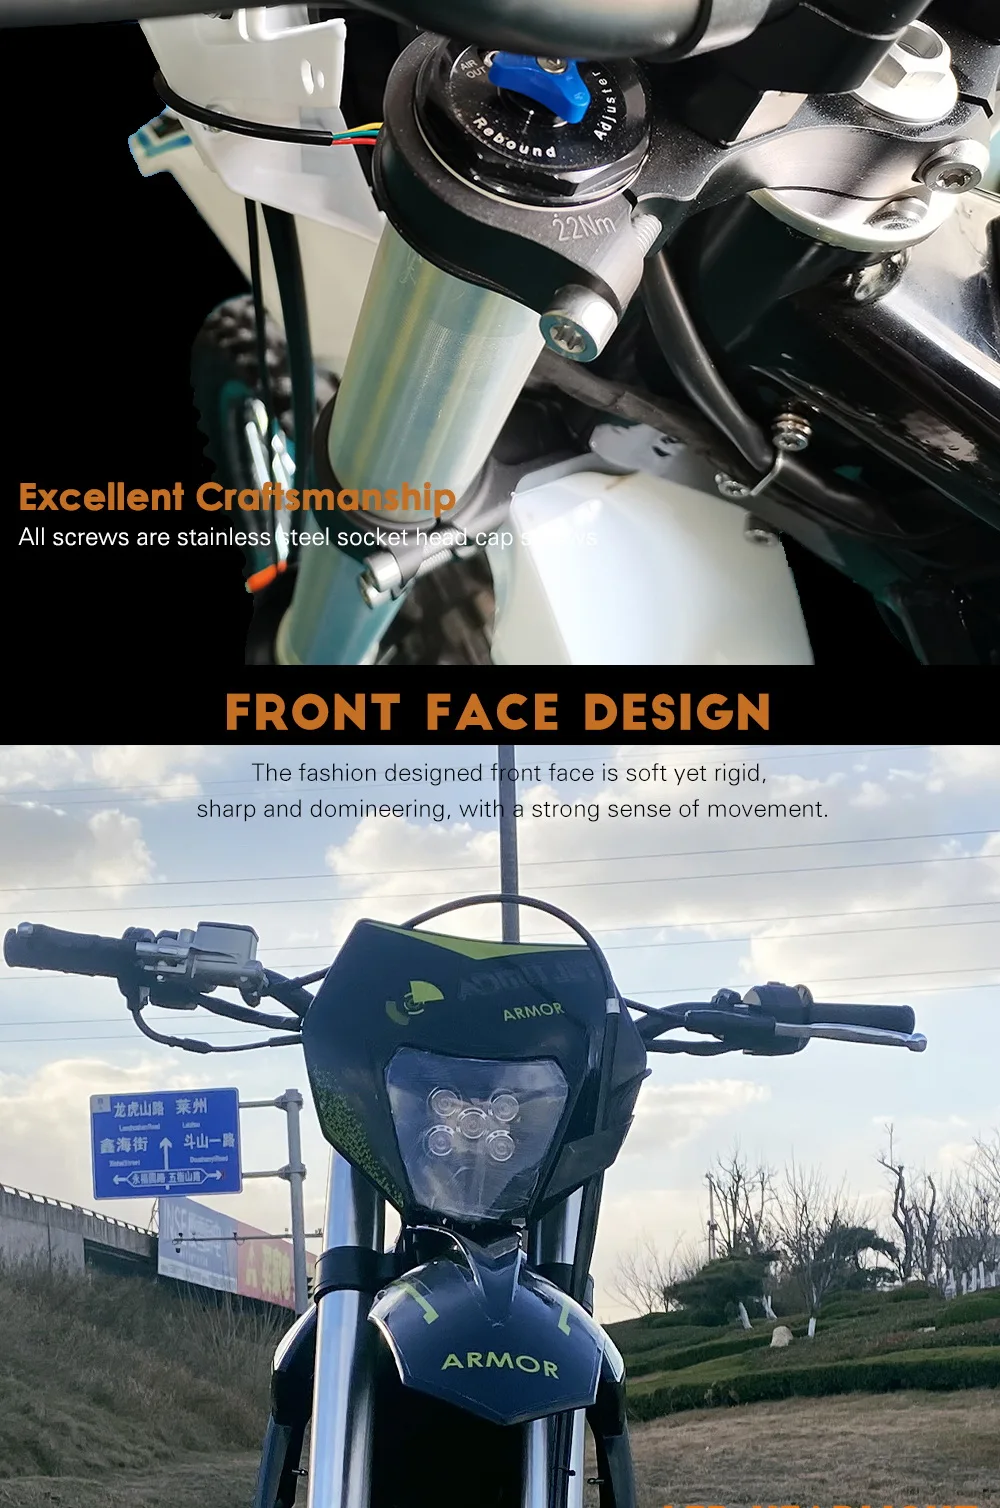 Electric Offroad Motorcycles: Deep Dive into 2023 AdmitJet Armor